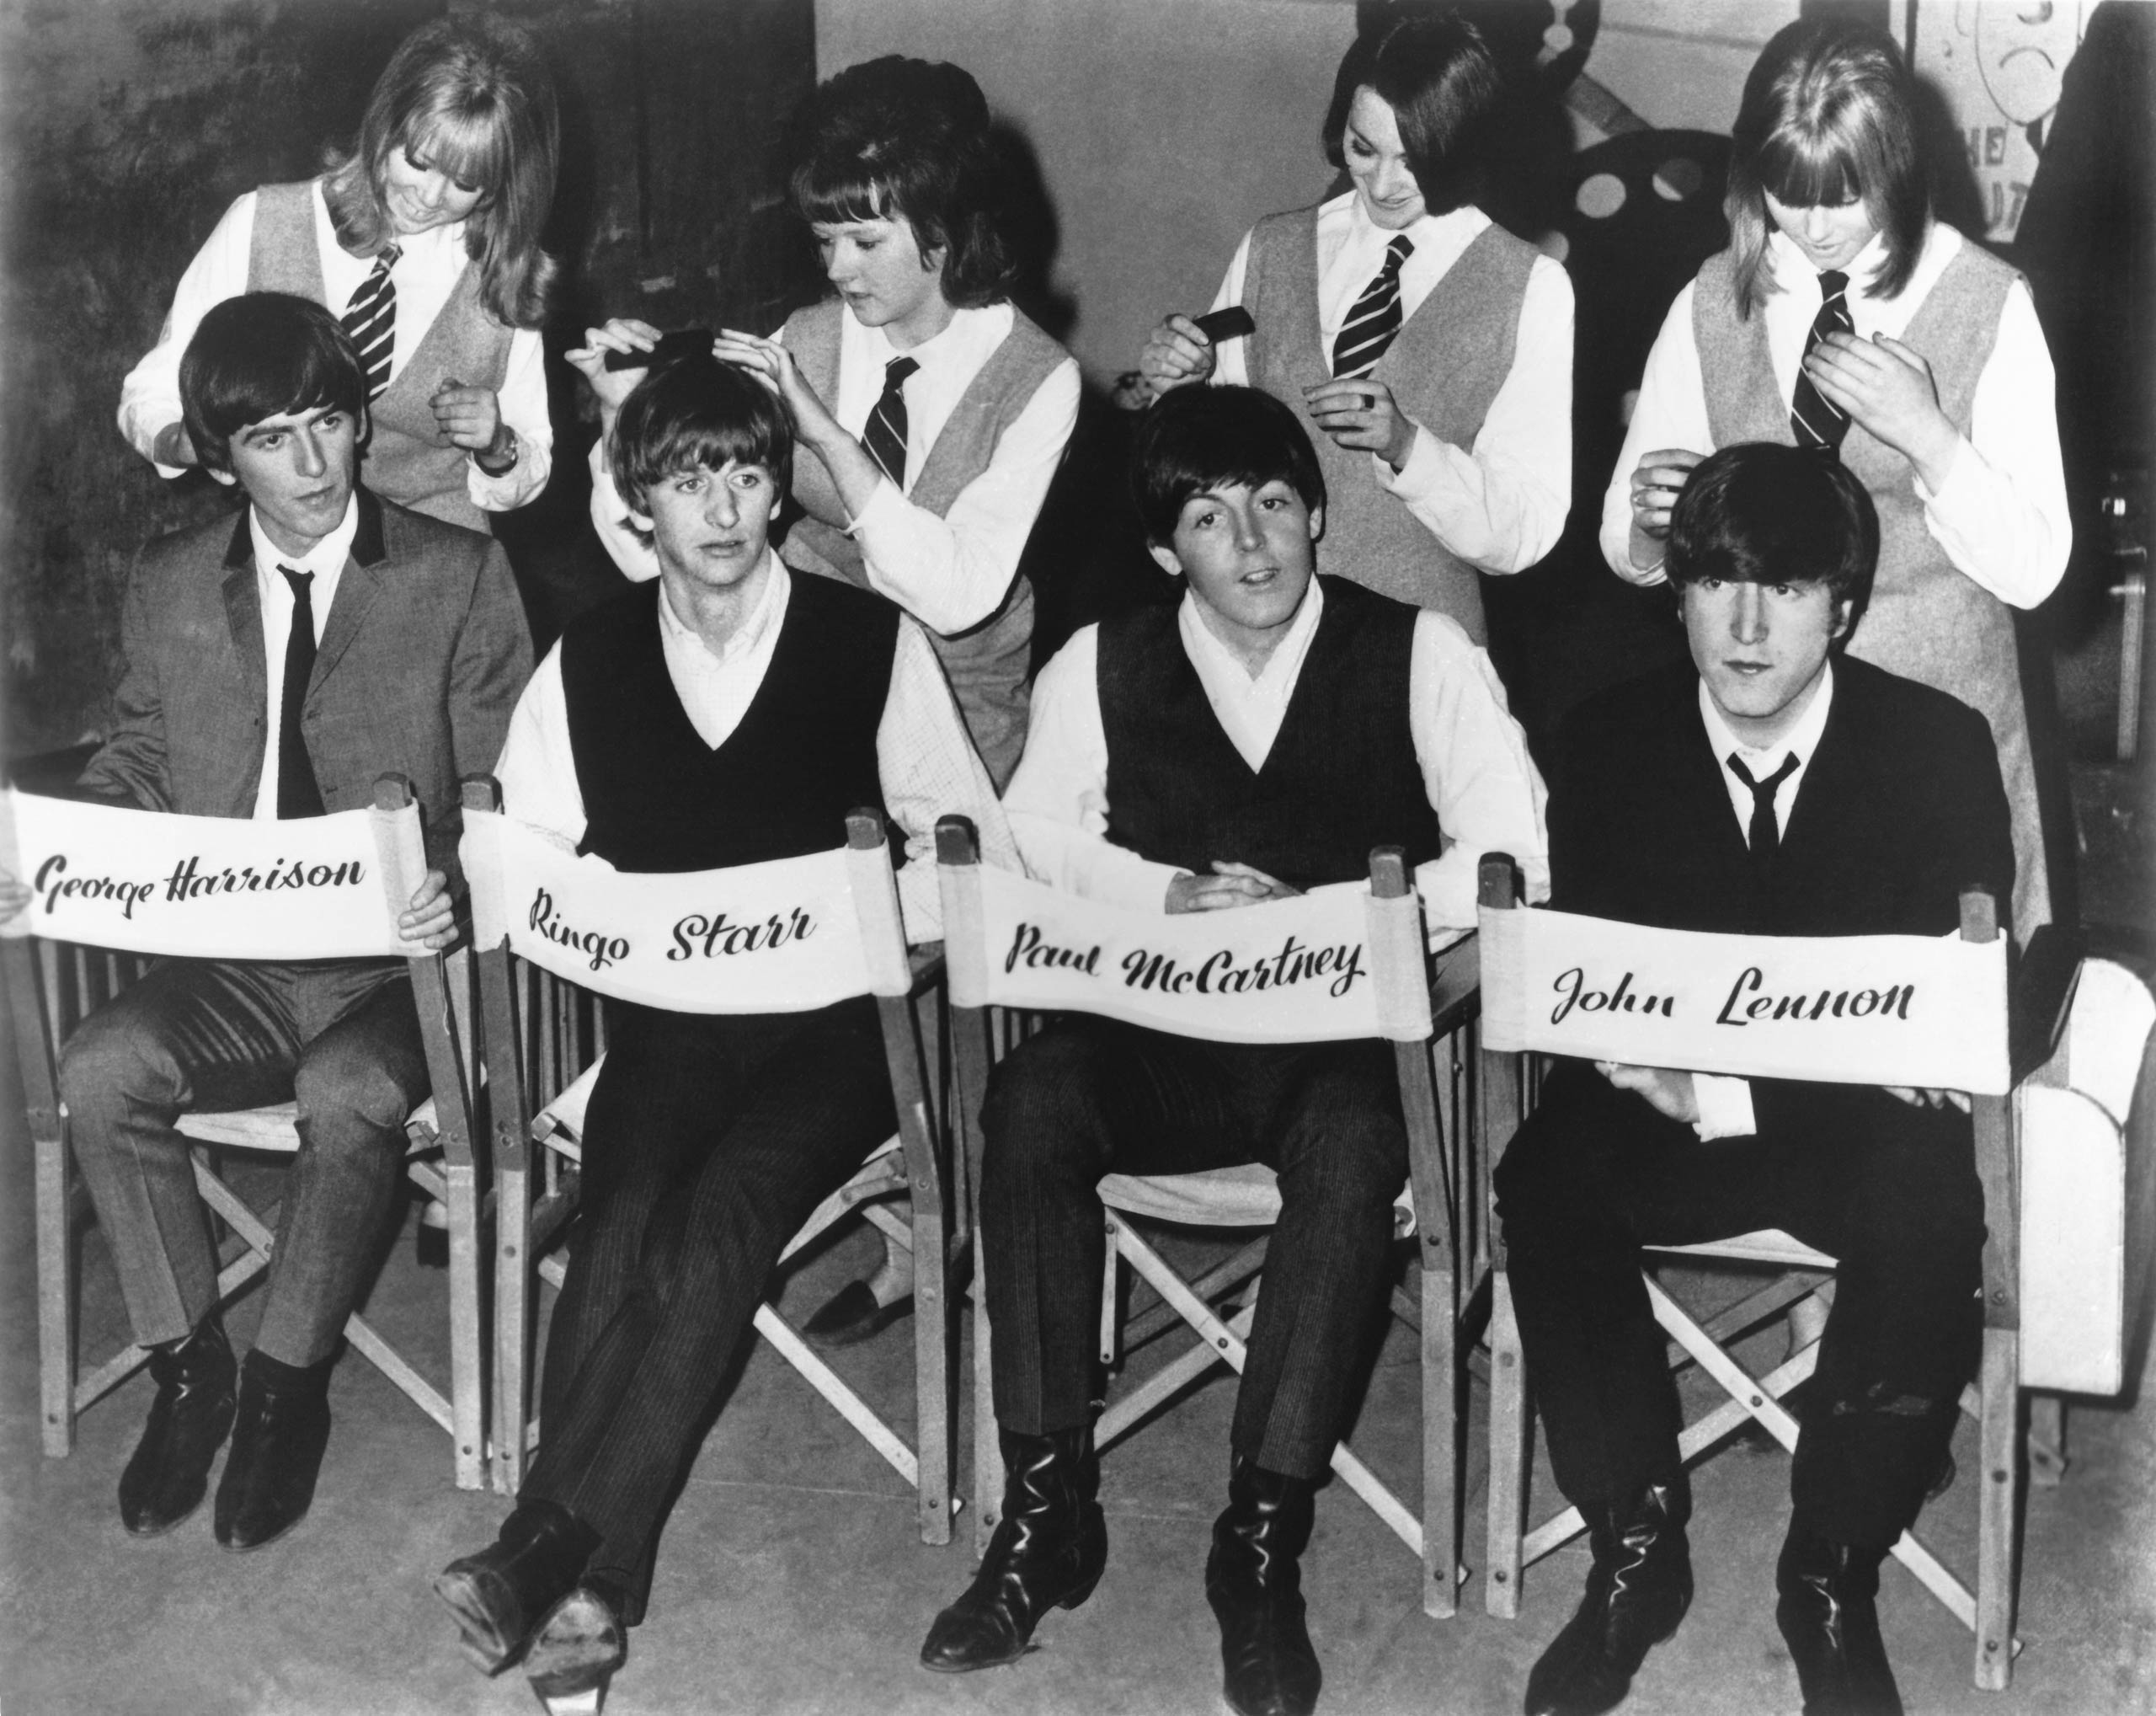 The Beatles are attended to by hairdressers during a break in the filming of A Hard Day's Night, 1964.